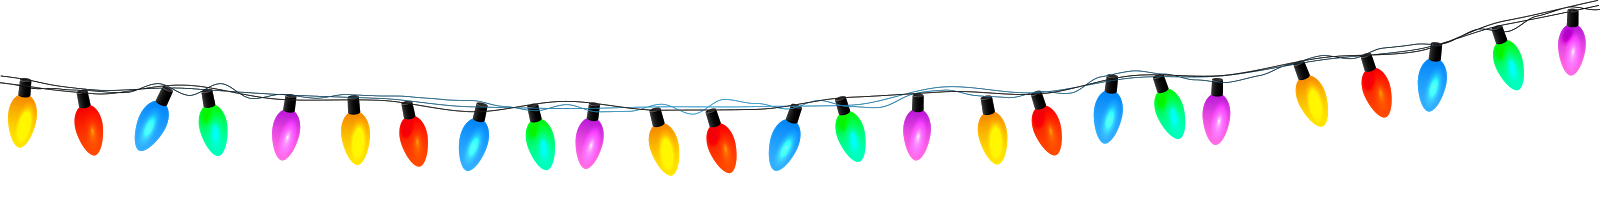 Christmas Lights Drawing Free download on ClipArtMag